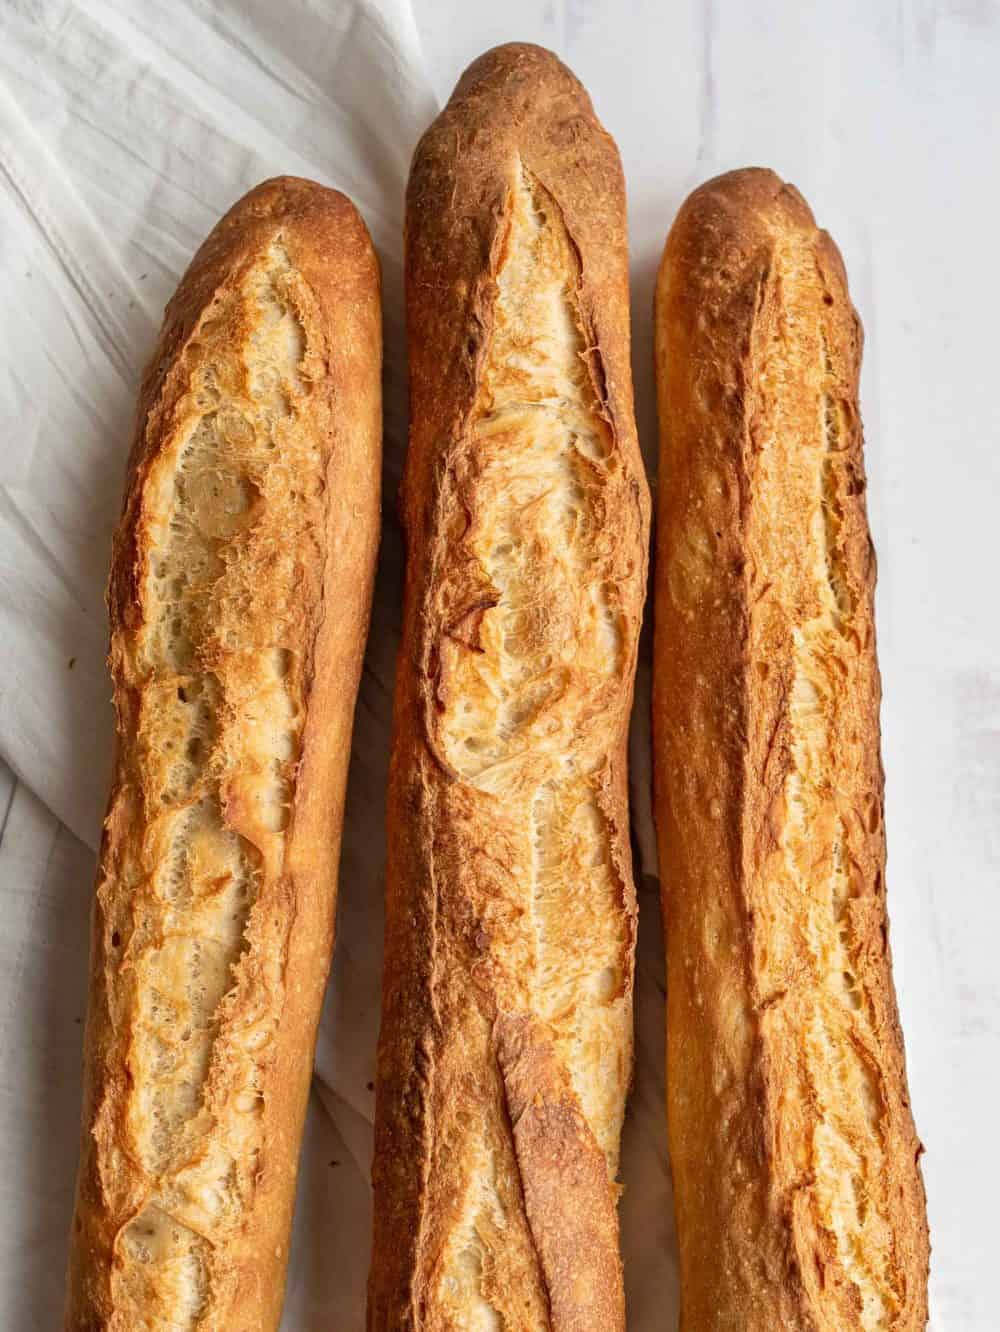 Three traditional baguettes on light wood. Plain, whole wheat and